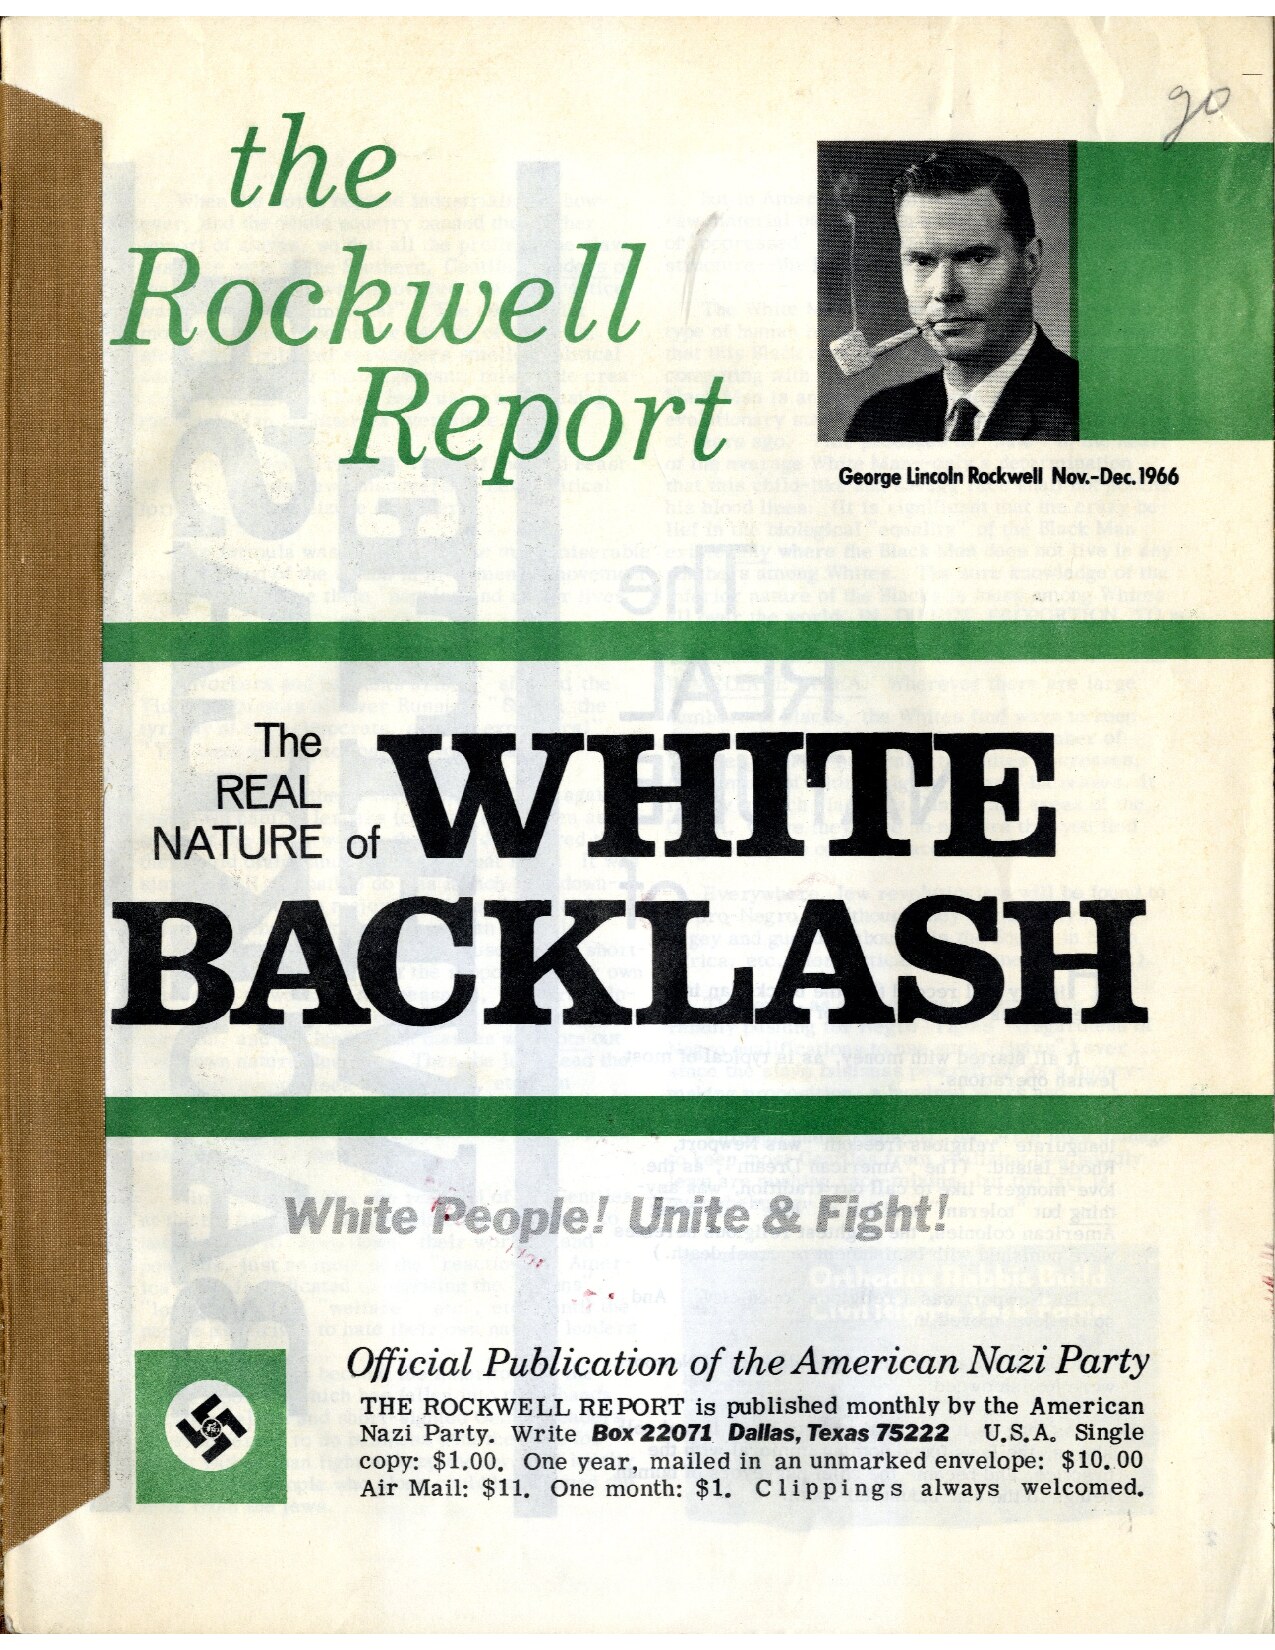 The Rockwell Report - The Real Nature Of White Backlash